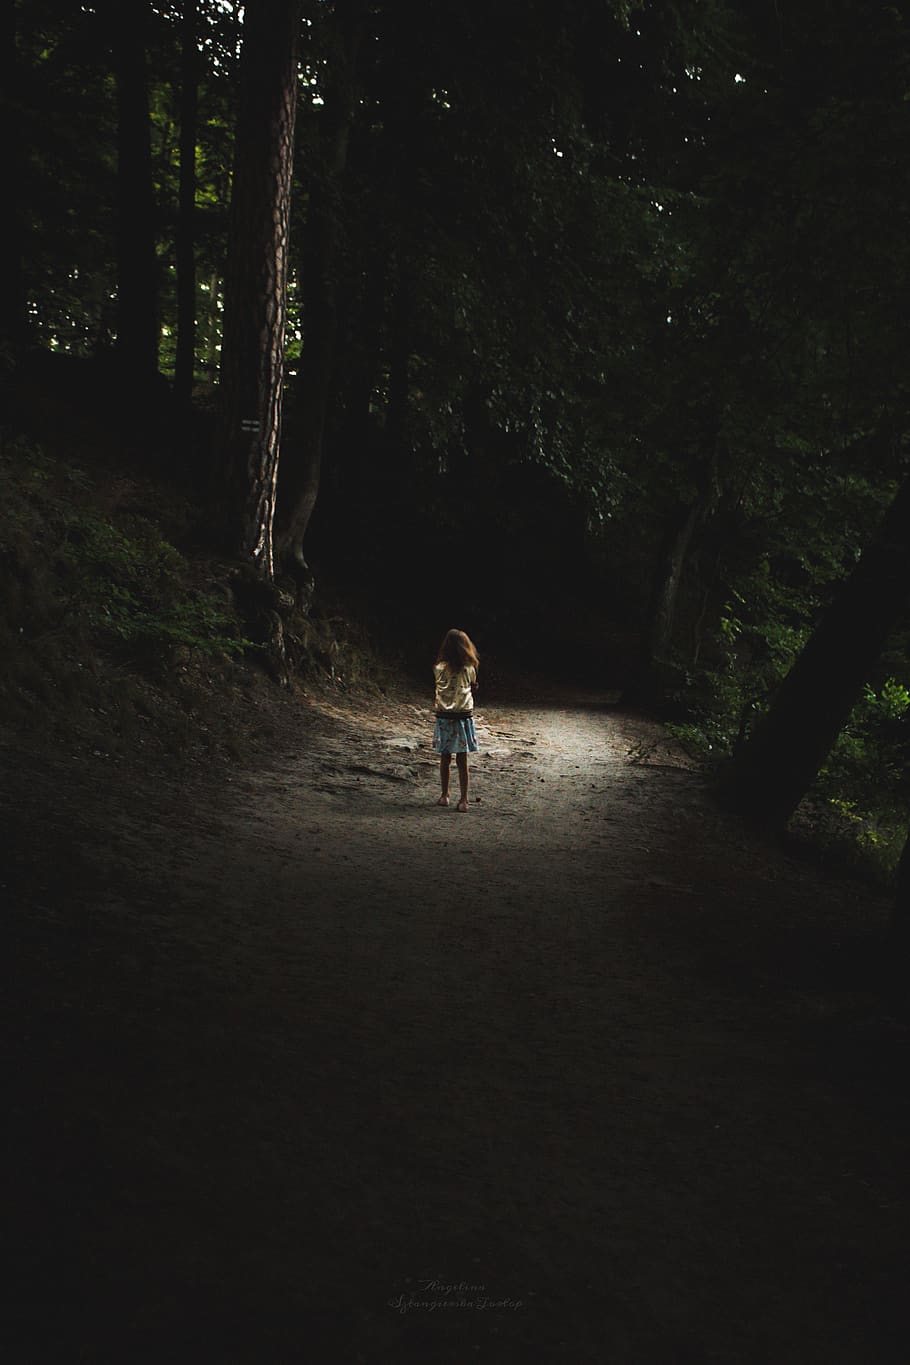 forest, child, alone, dark, gloomy, scary, path, loneliness